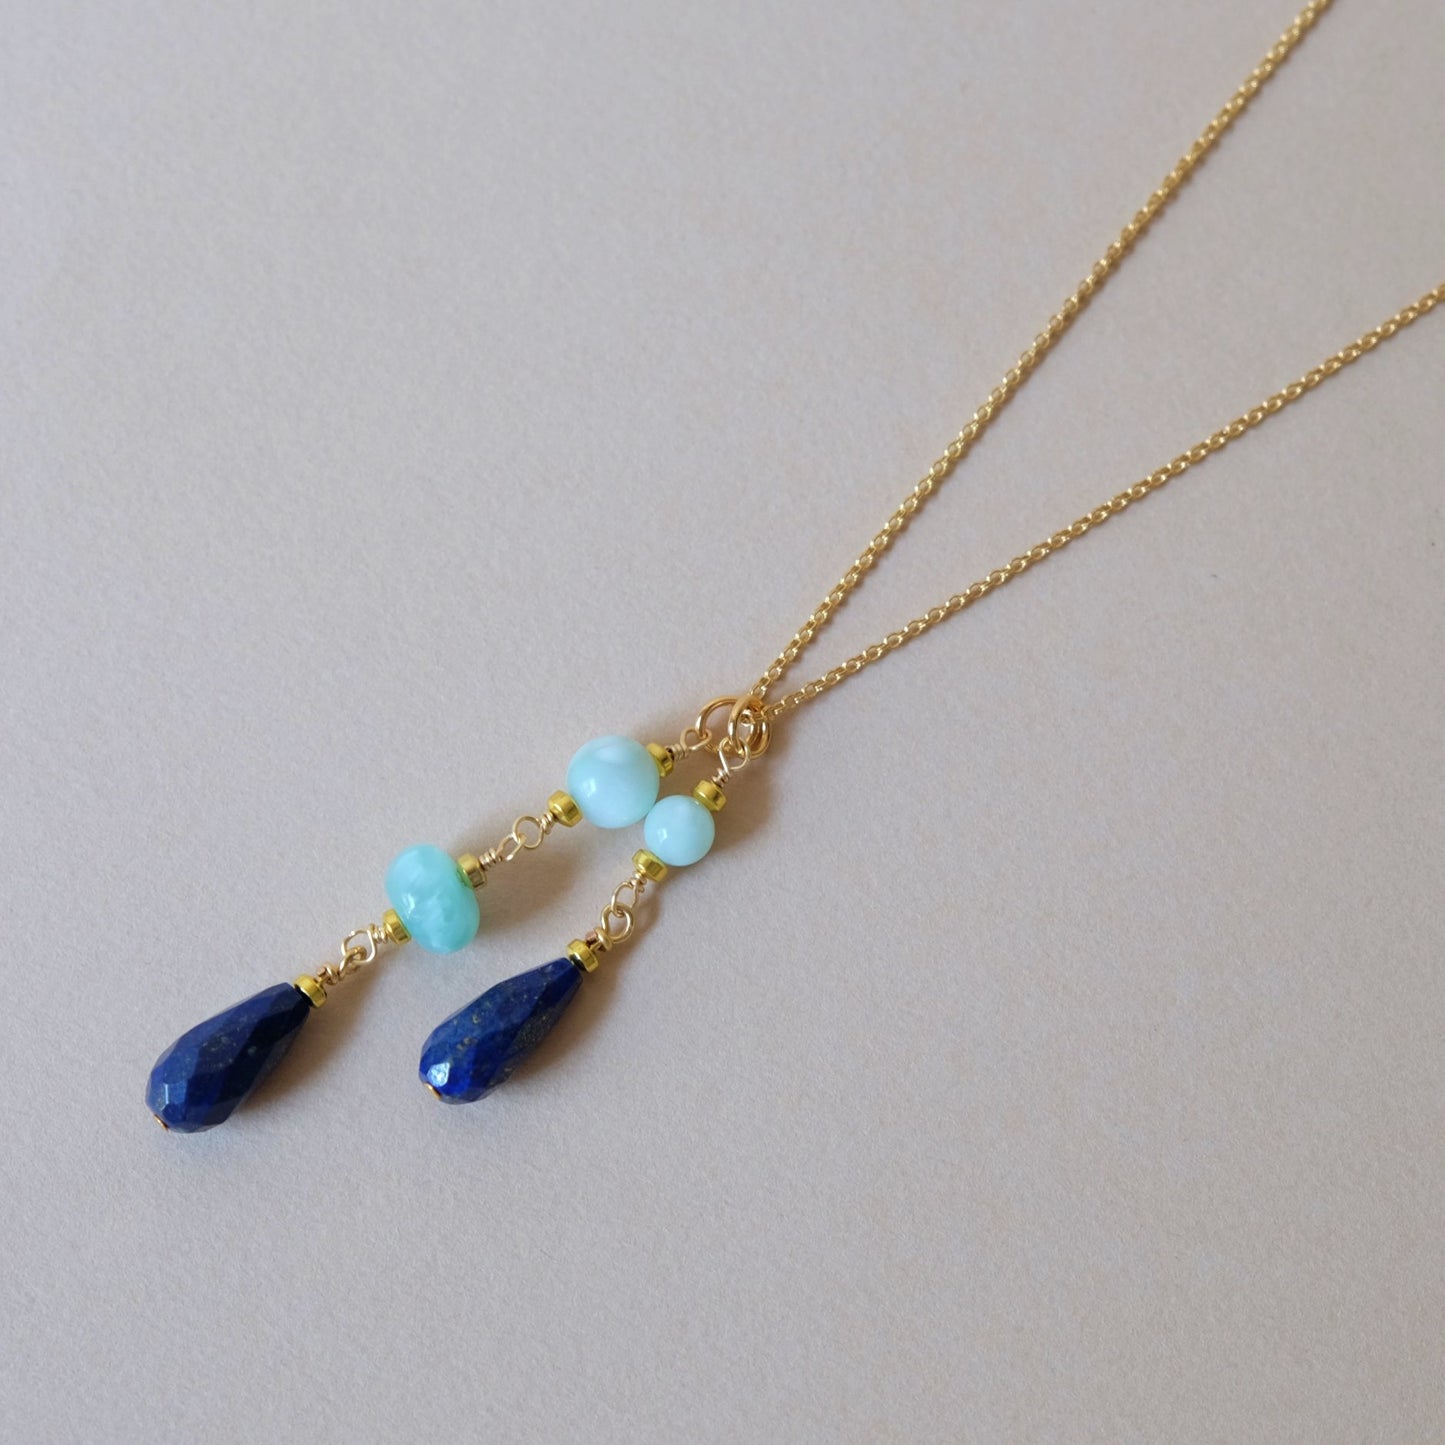 Necklace with Lapis Lazuli and Moonstone Charms